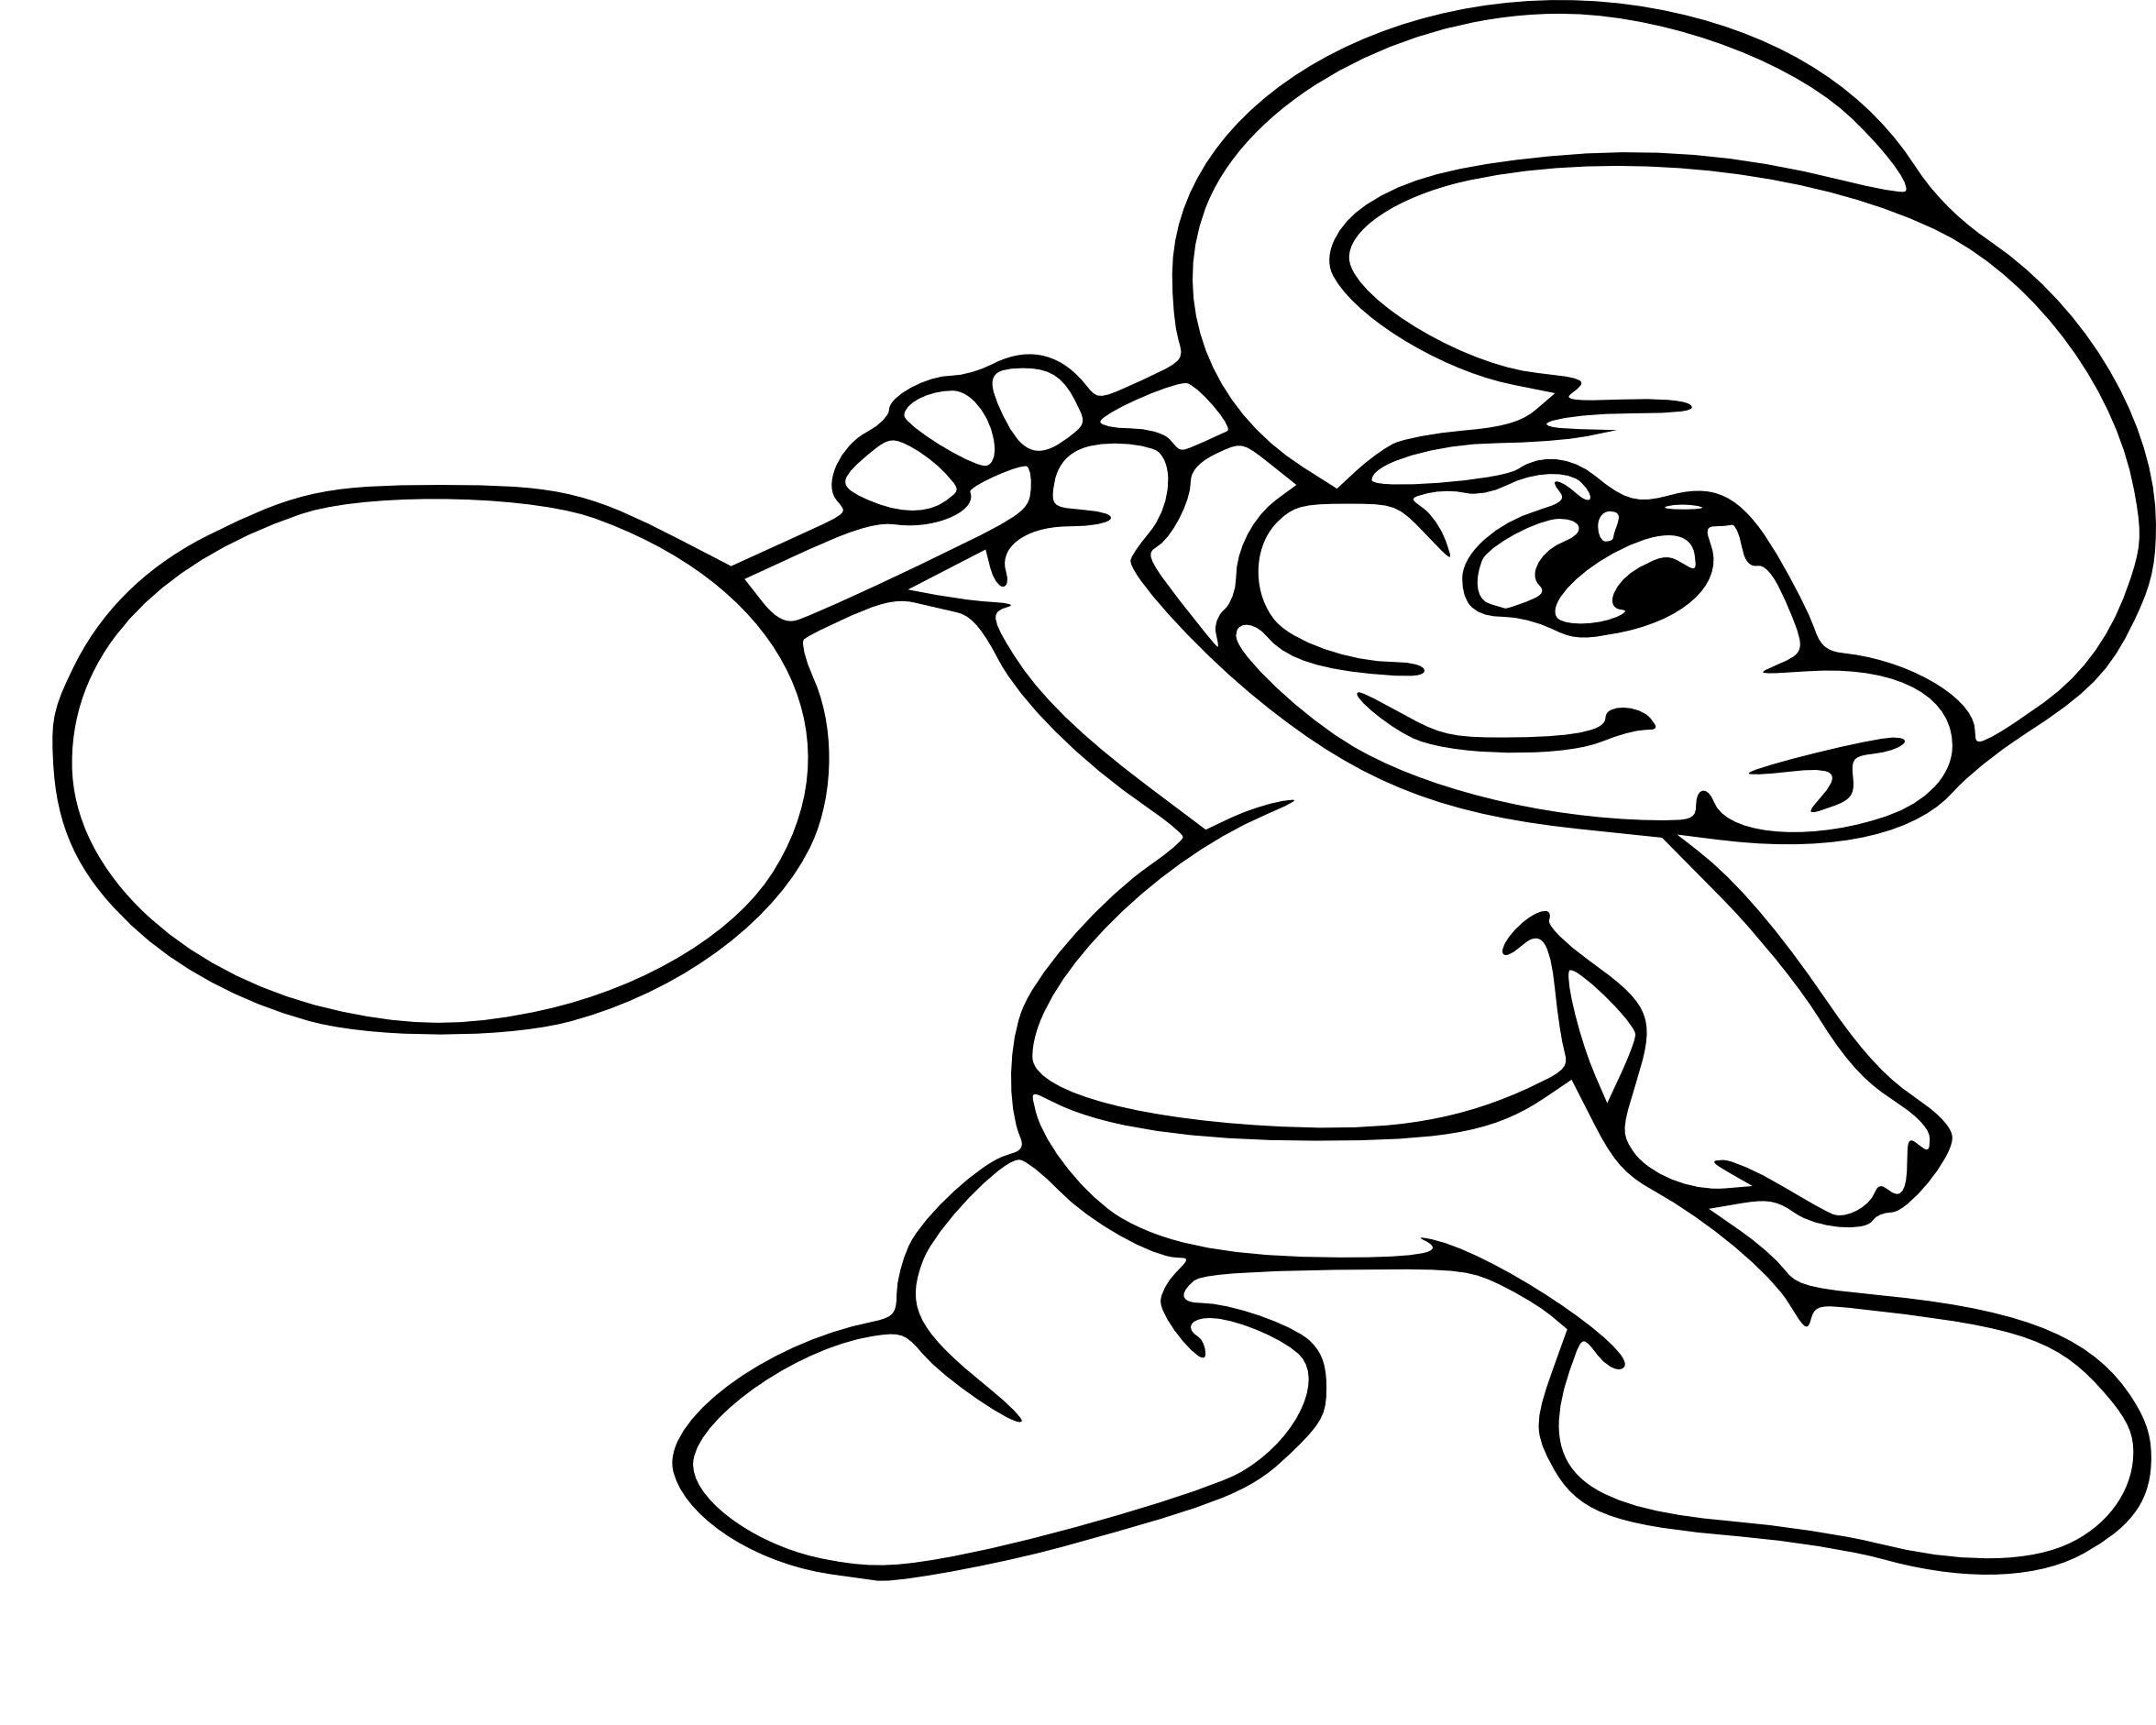 Strong Smurf coloring page